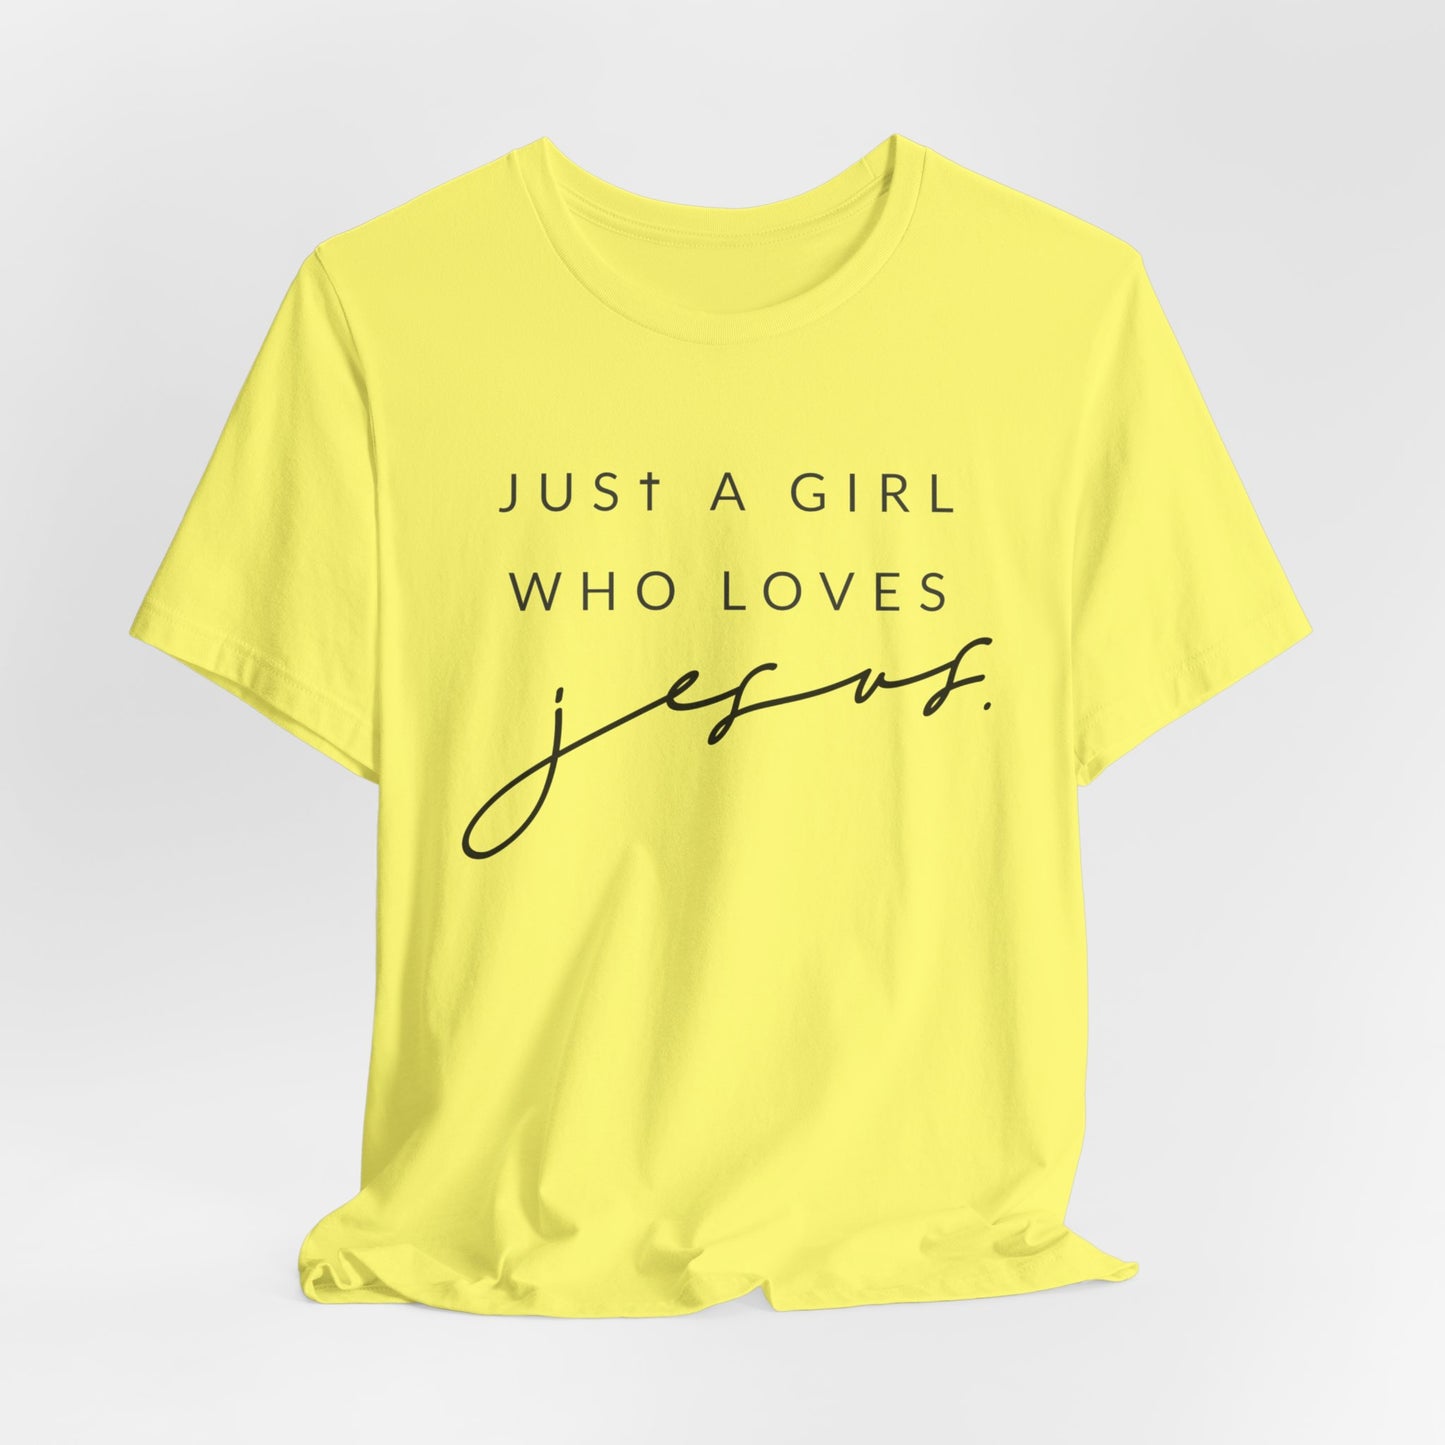 Just A Girl Who Loves Jesus Tee